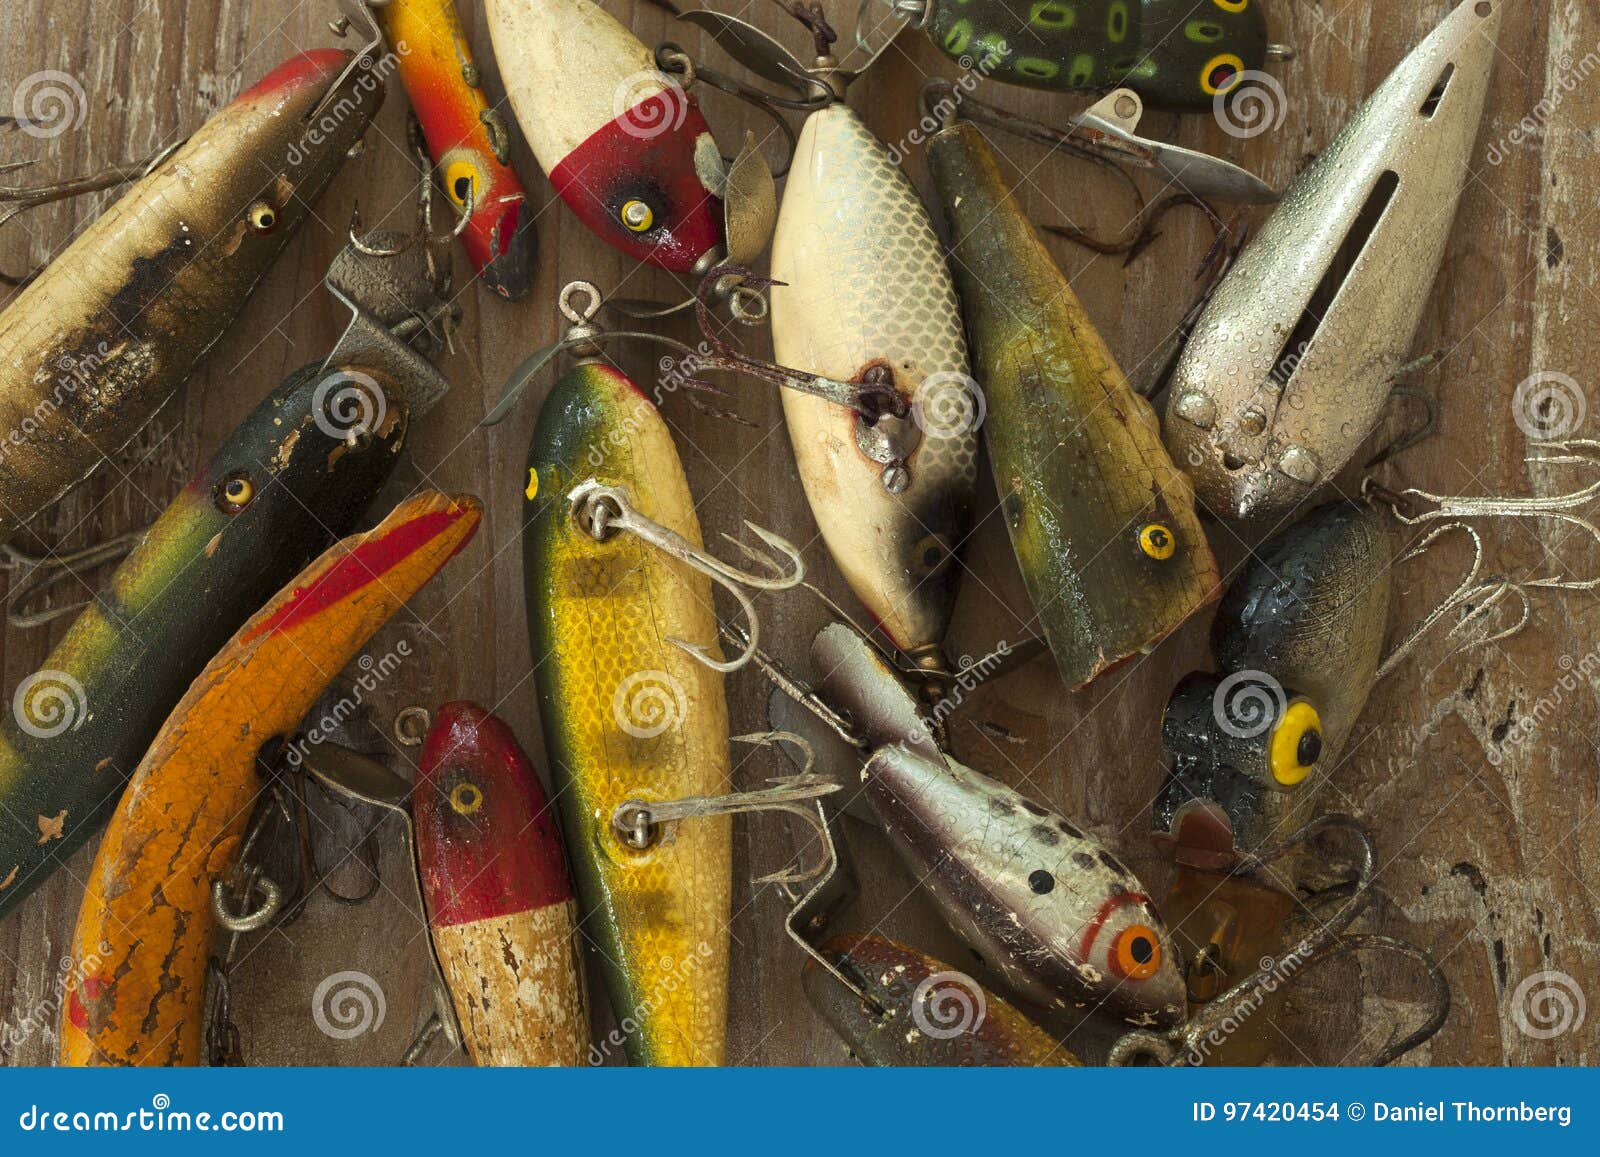 Wet Antique Fishing Lures Viewed from Above on a Rough Wood Surf